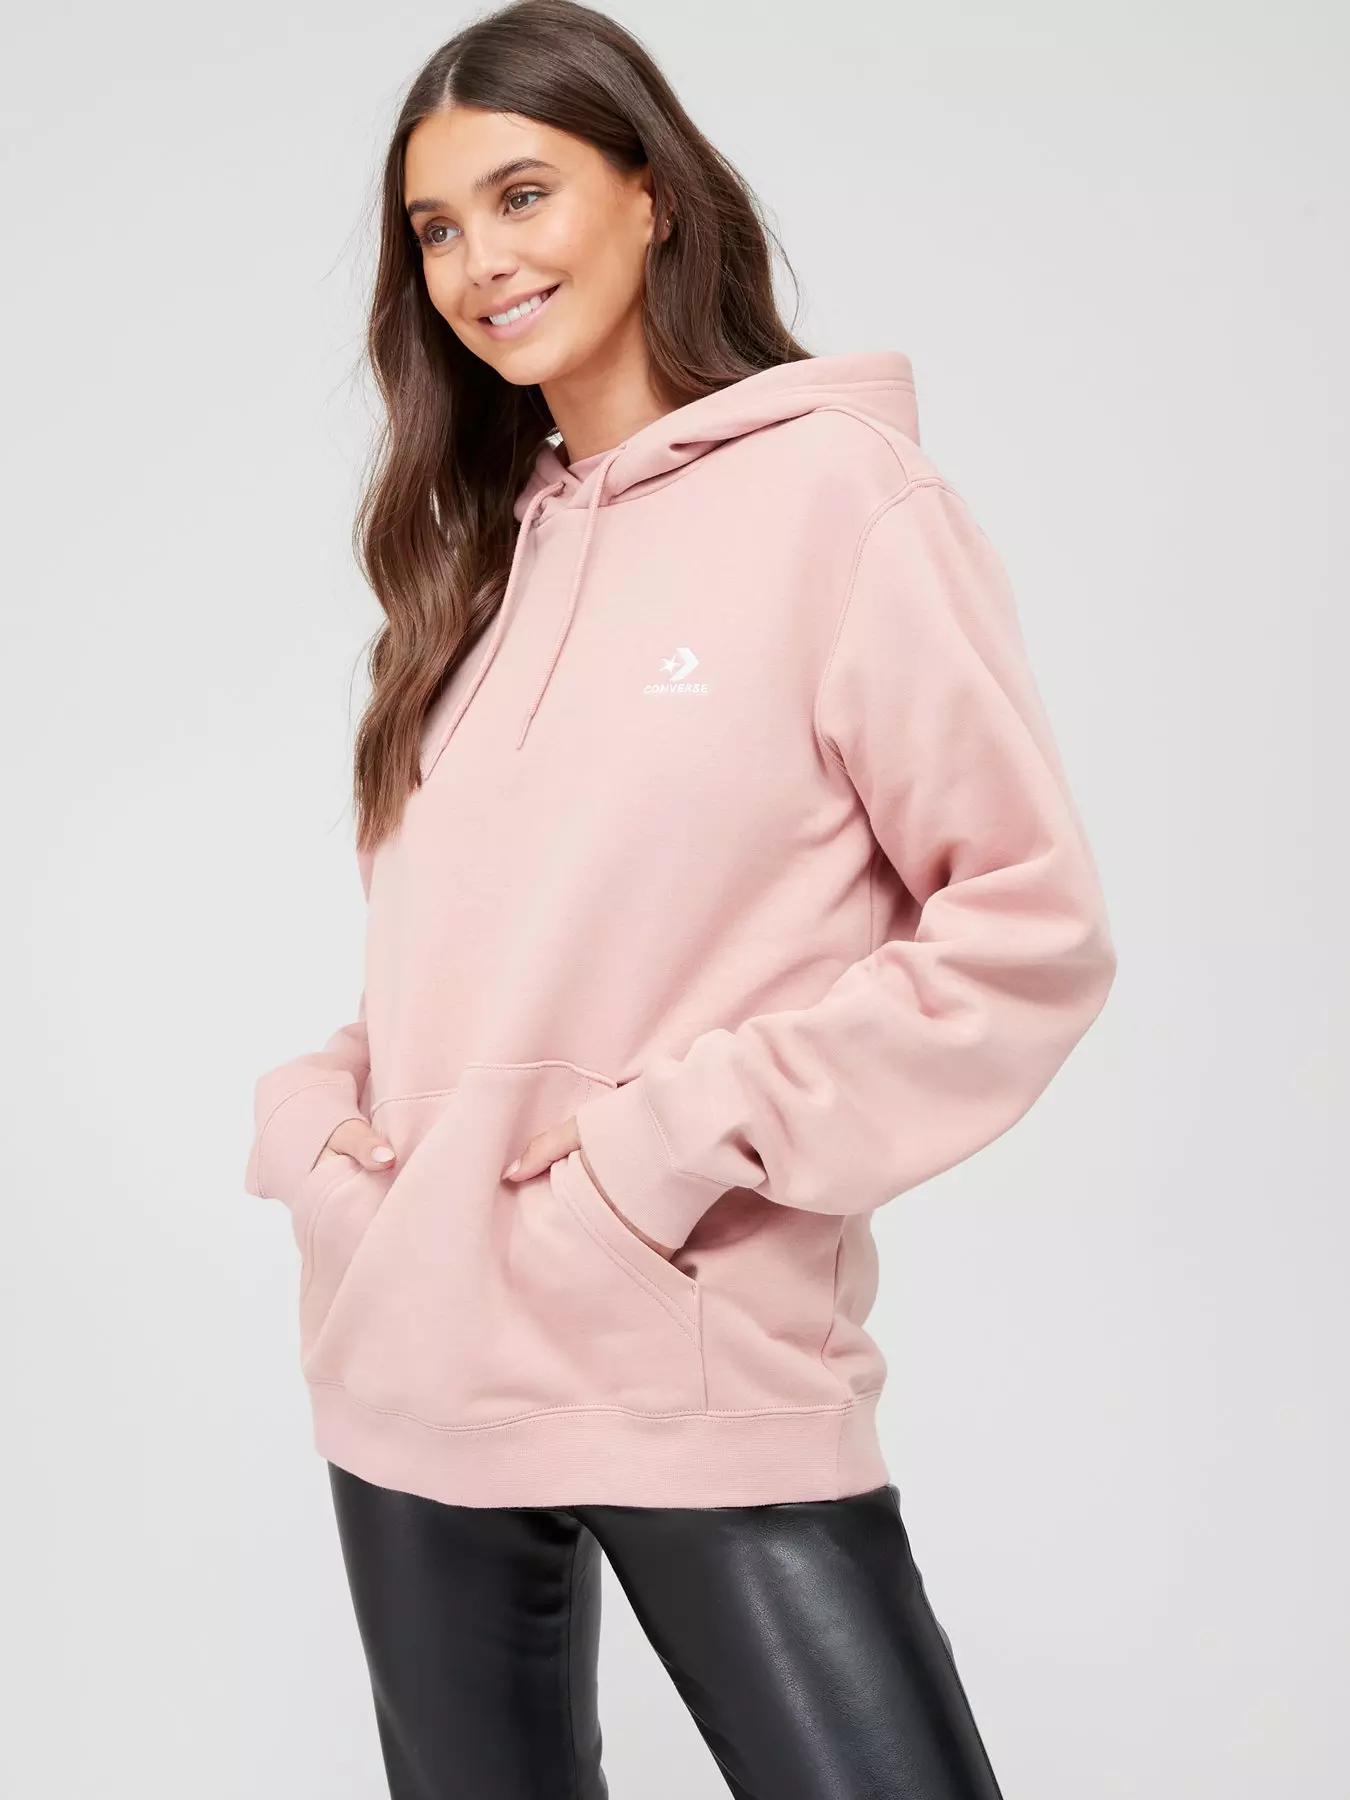 Converse Embroidered Star Chevron Hoodie - Pink